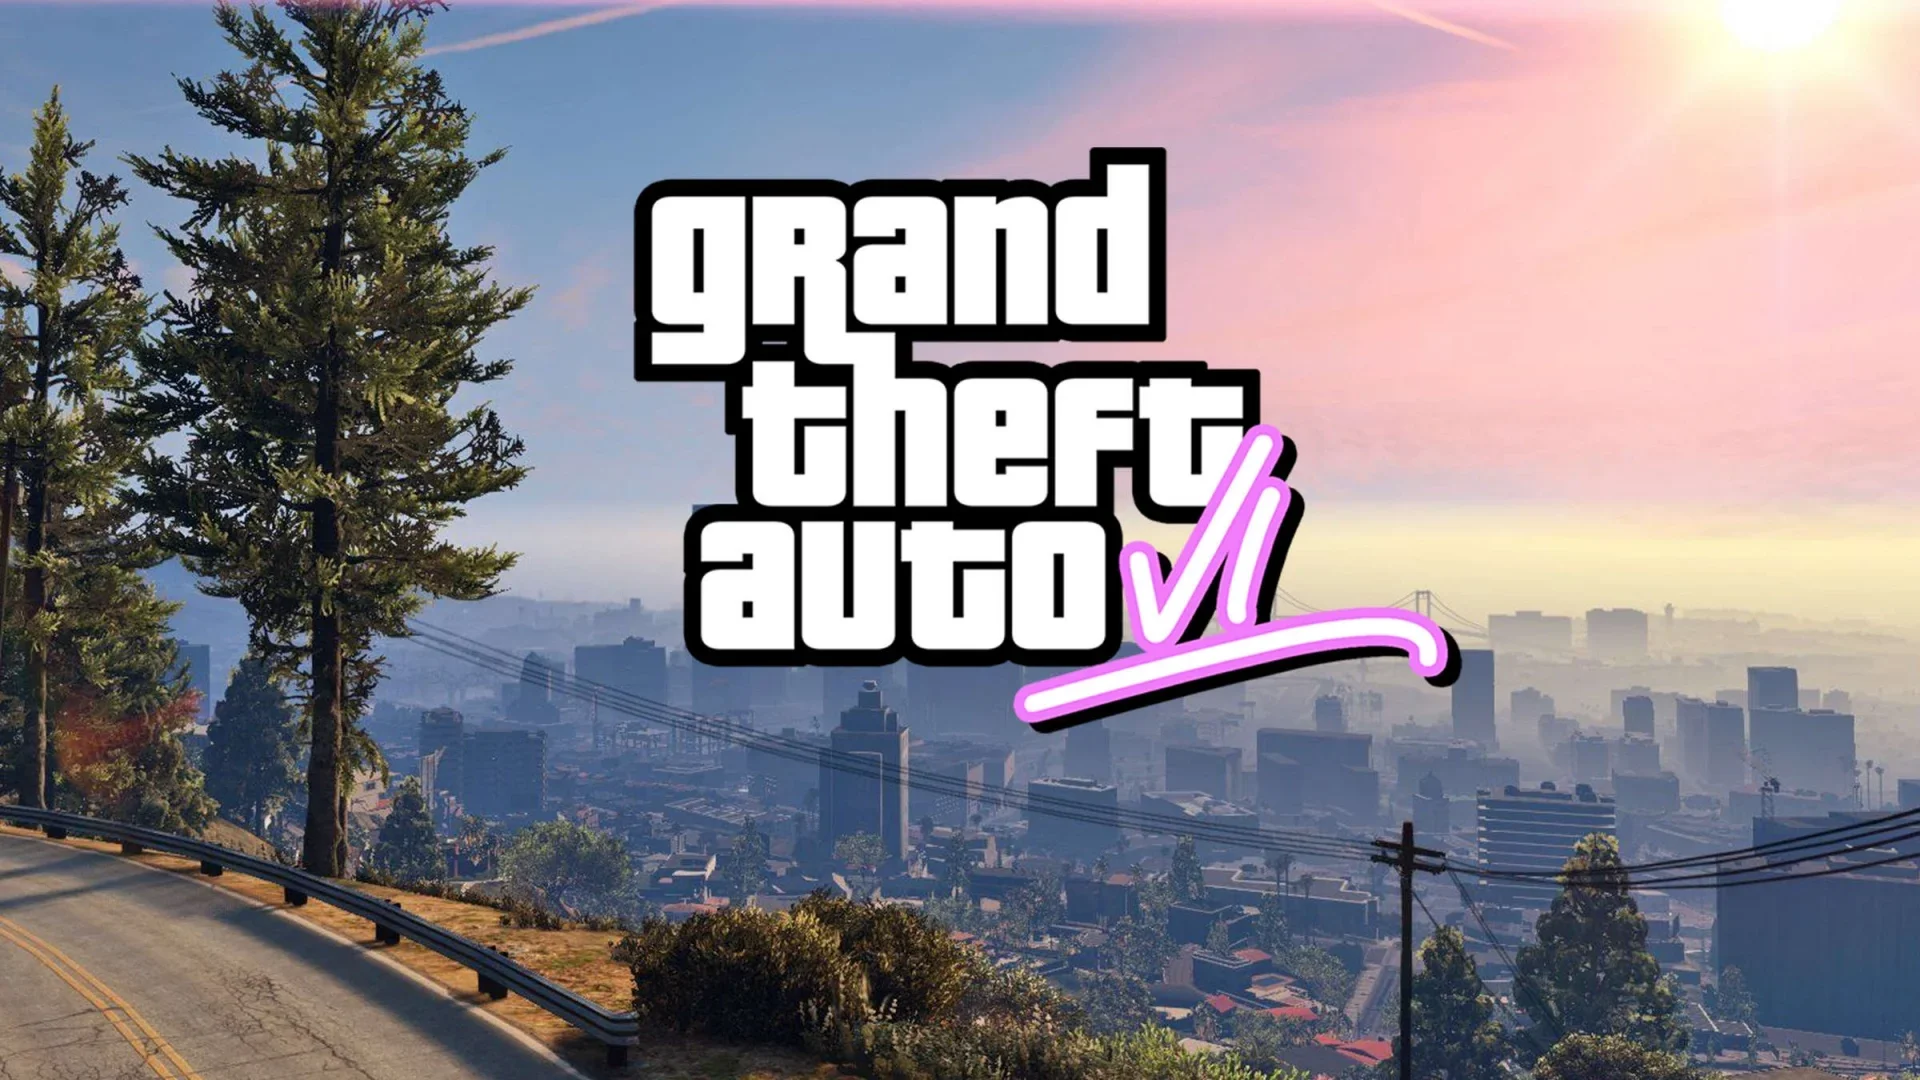 GTA 6 could be not only Rockstar's most expensive game, but also the most expensive entertainment product of all time.